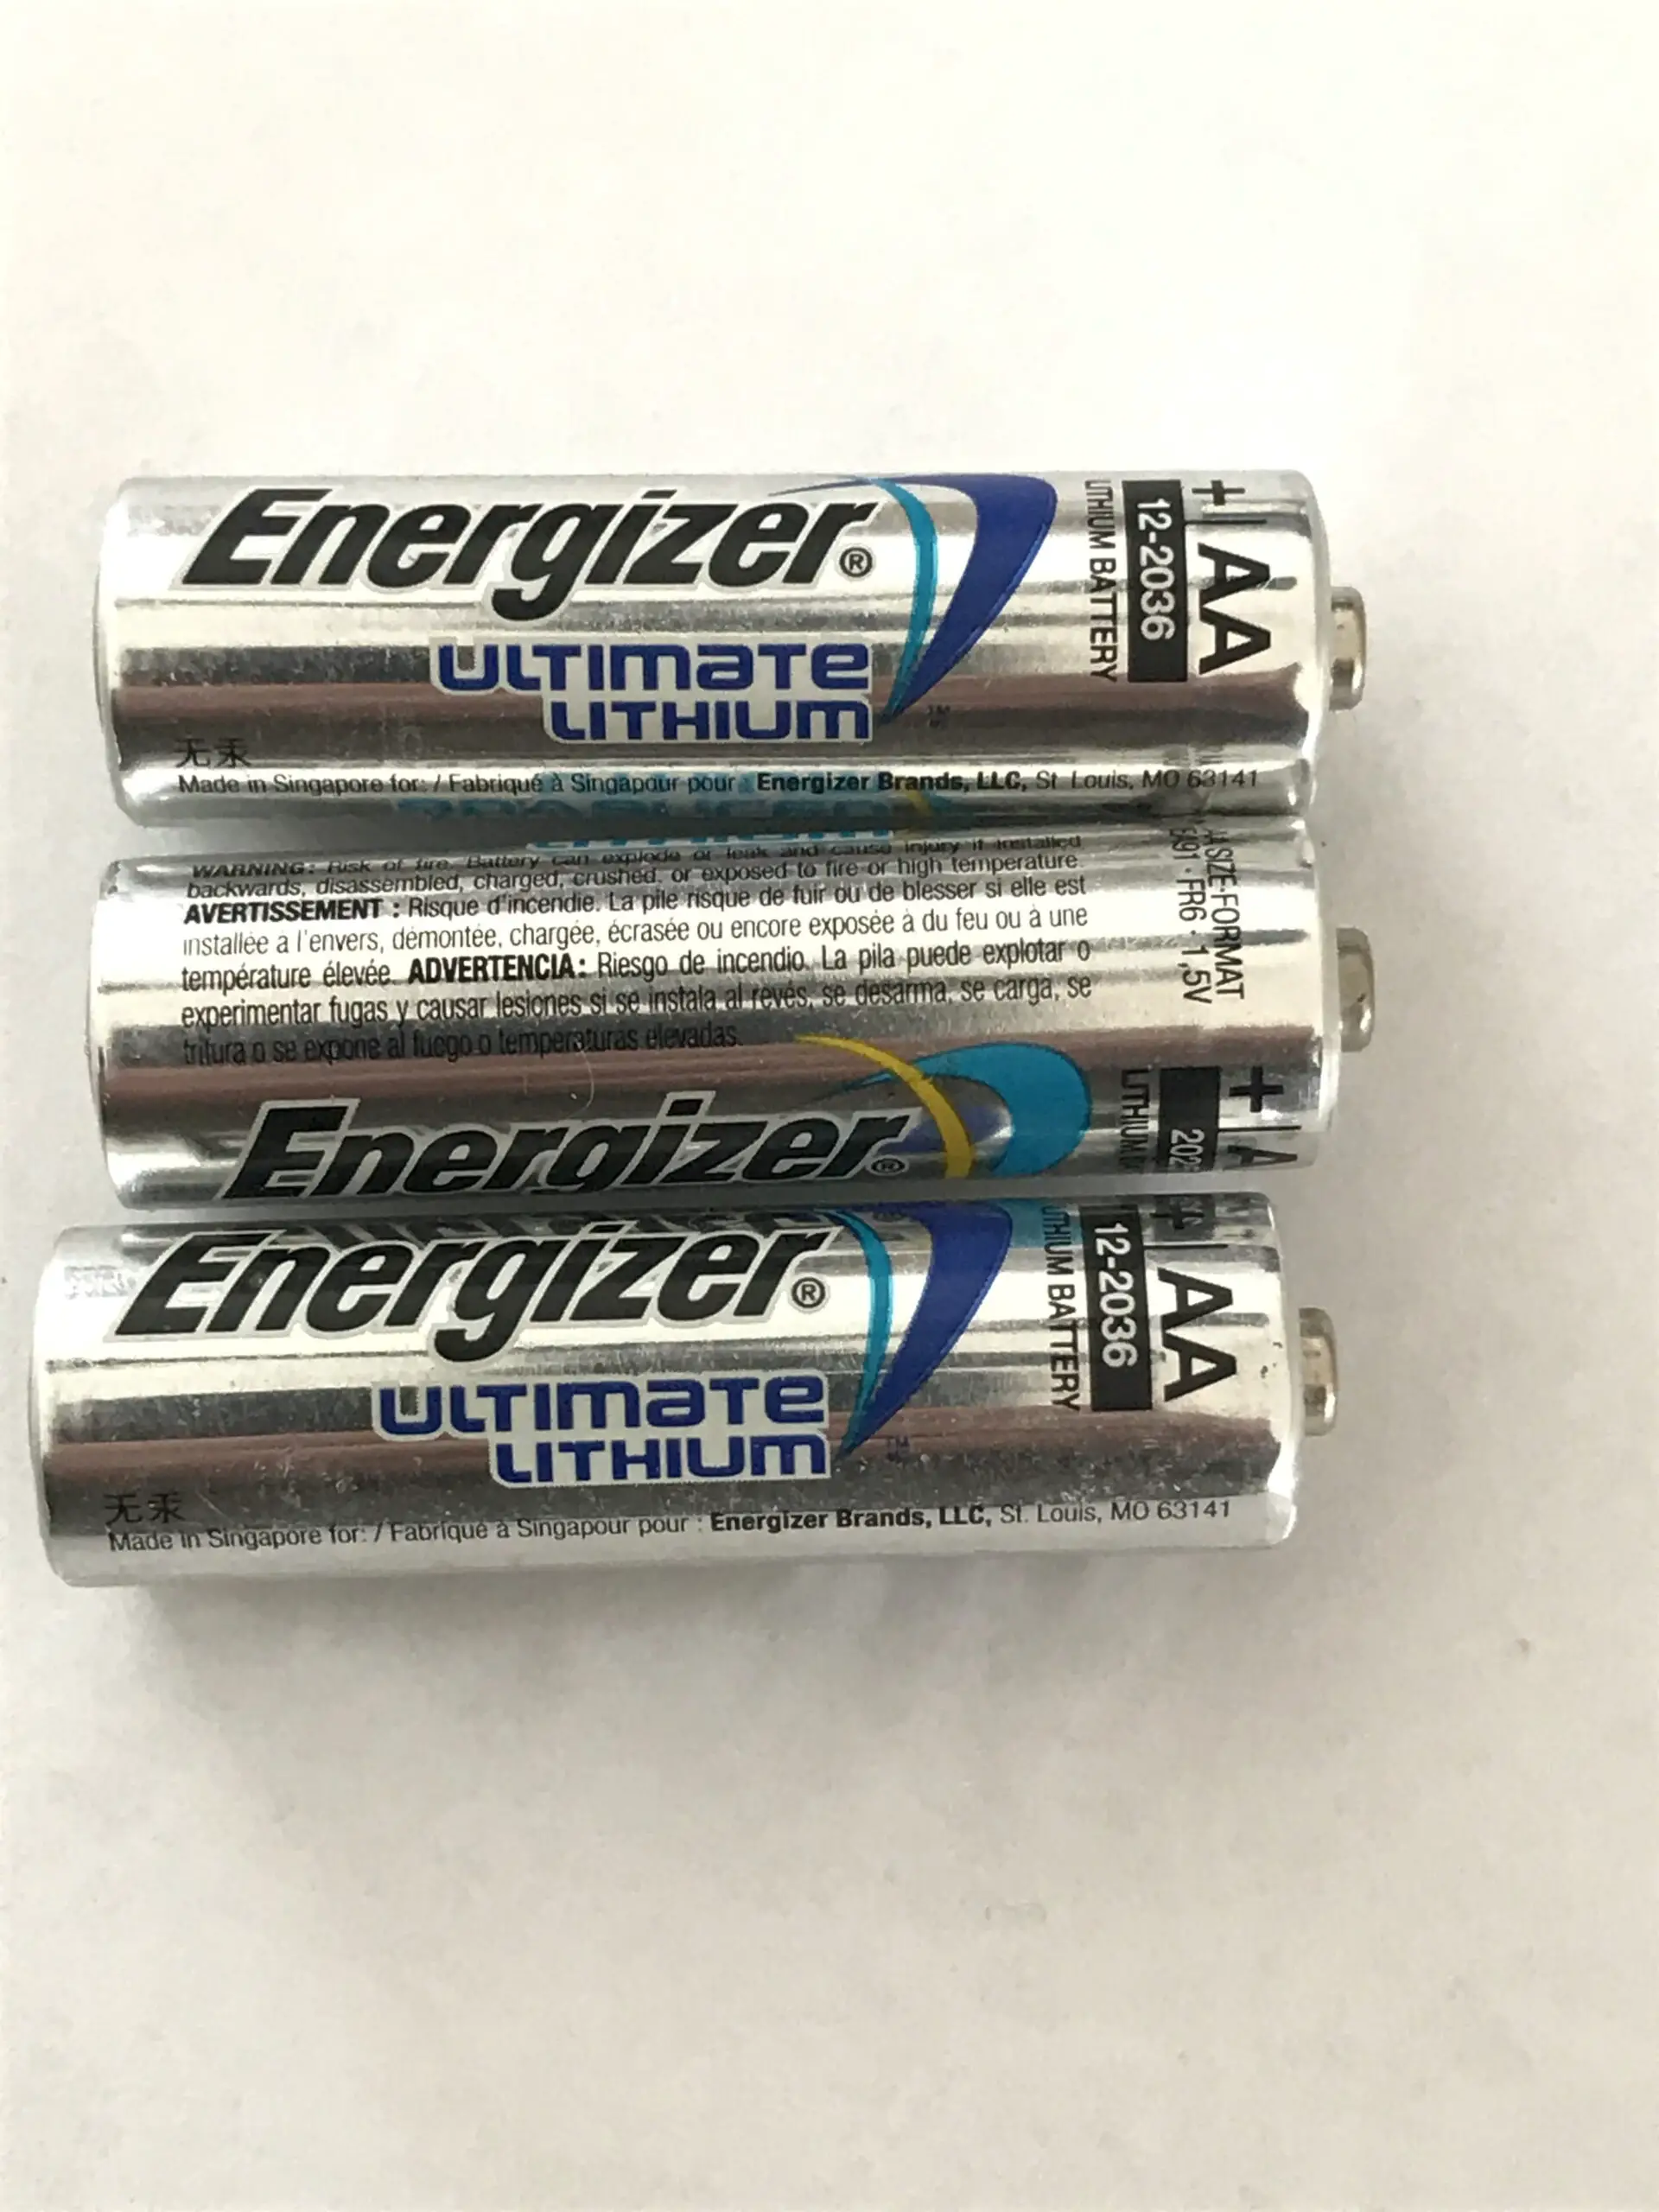 Commit to recycling used batteries on National Battery Day